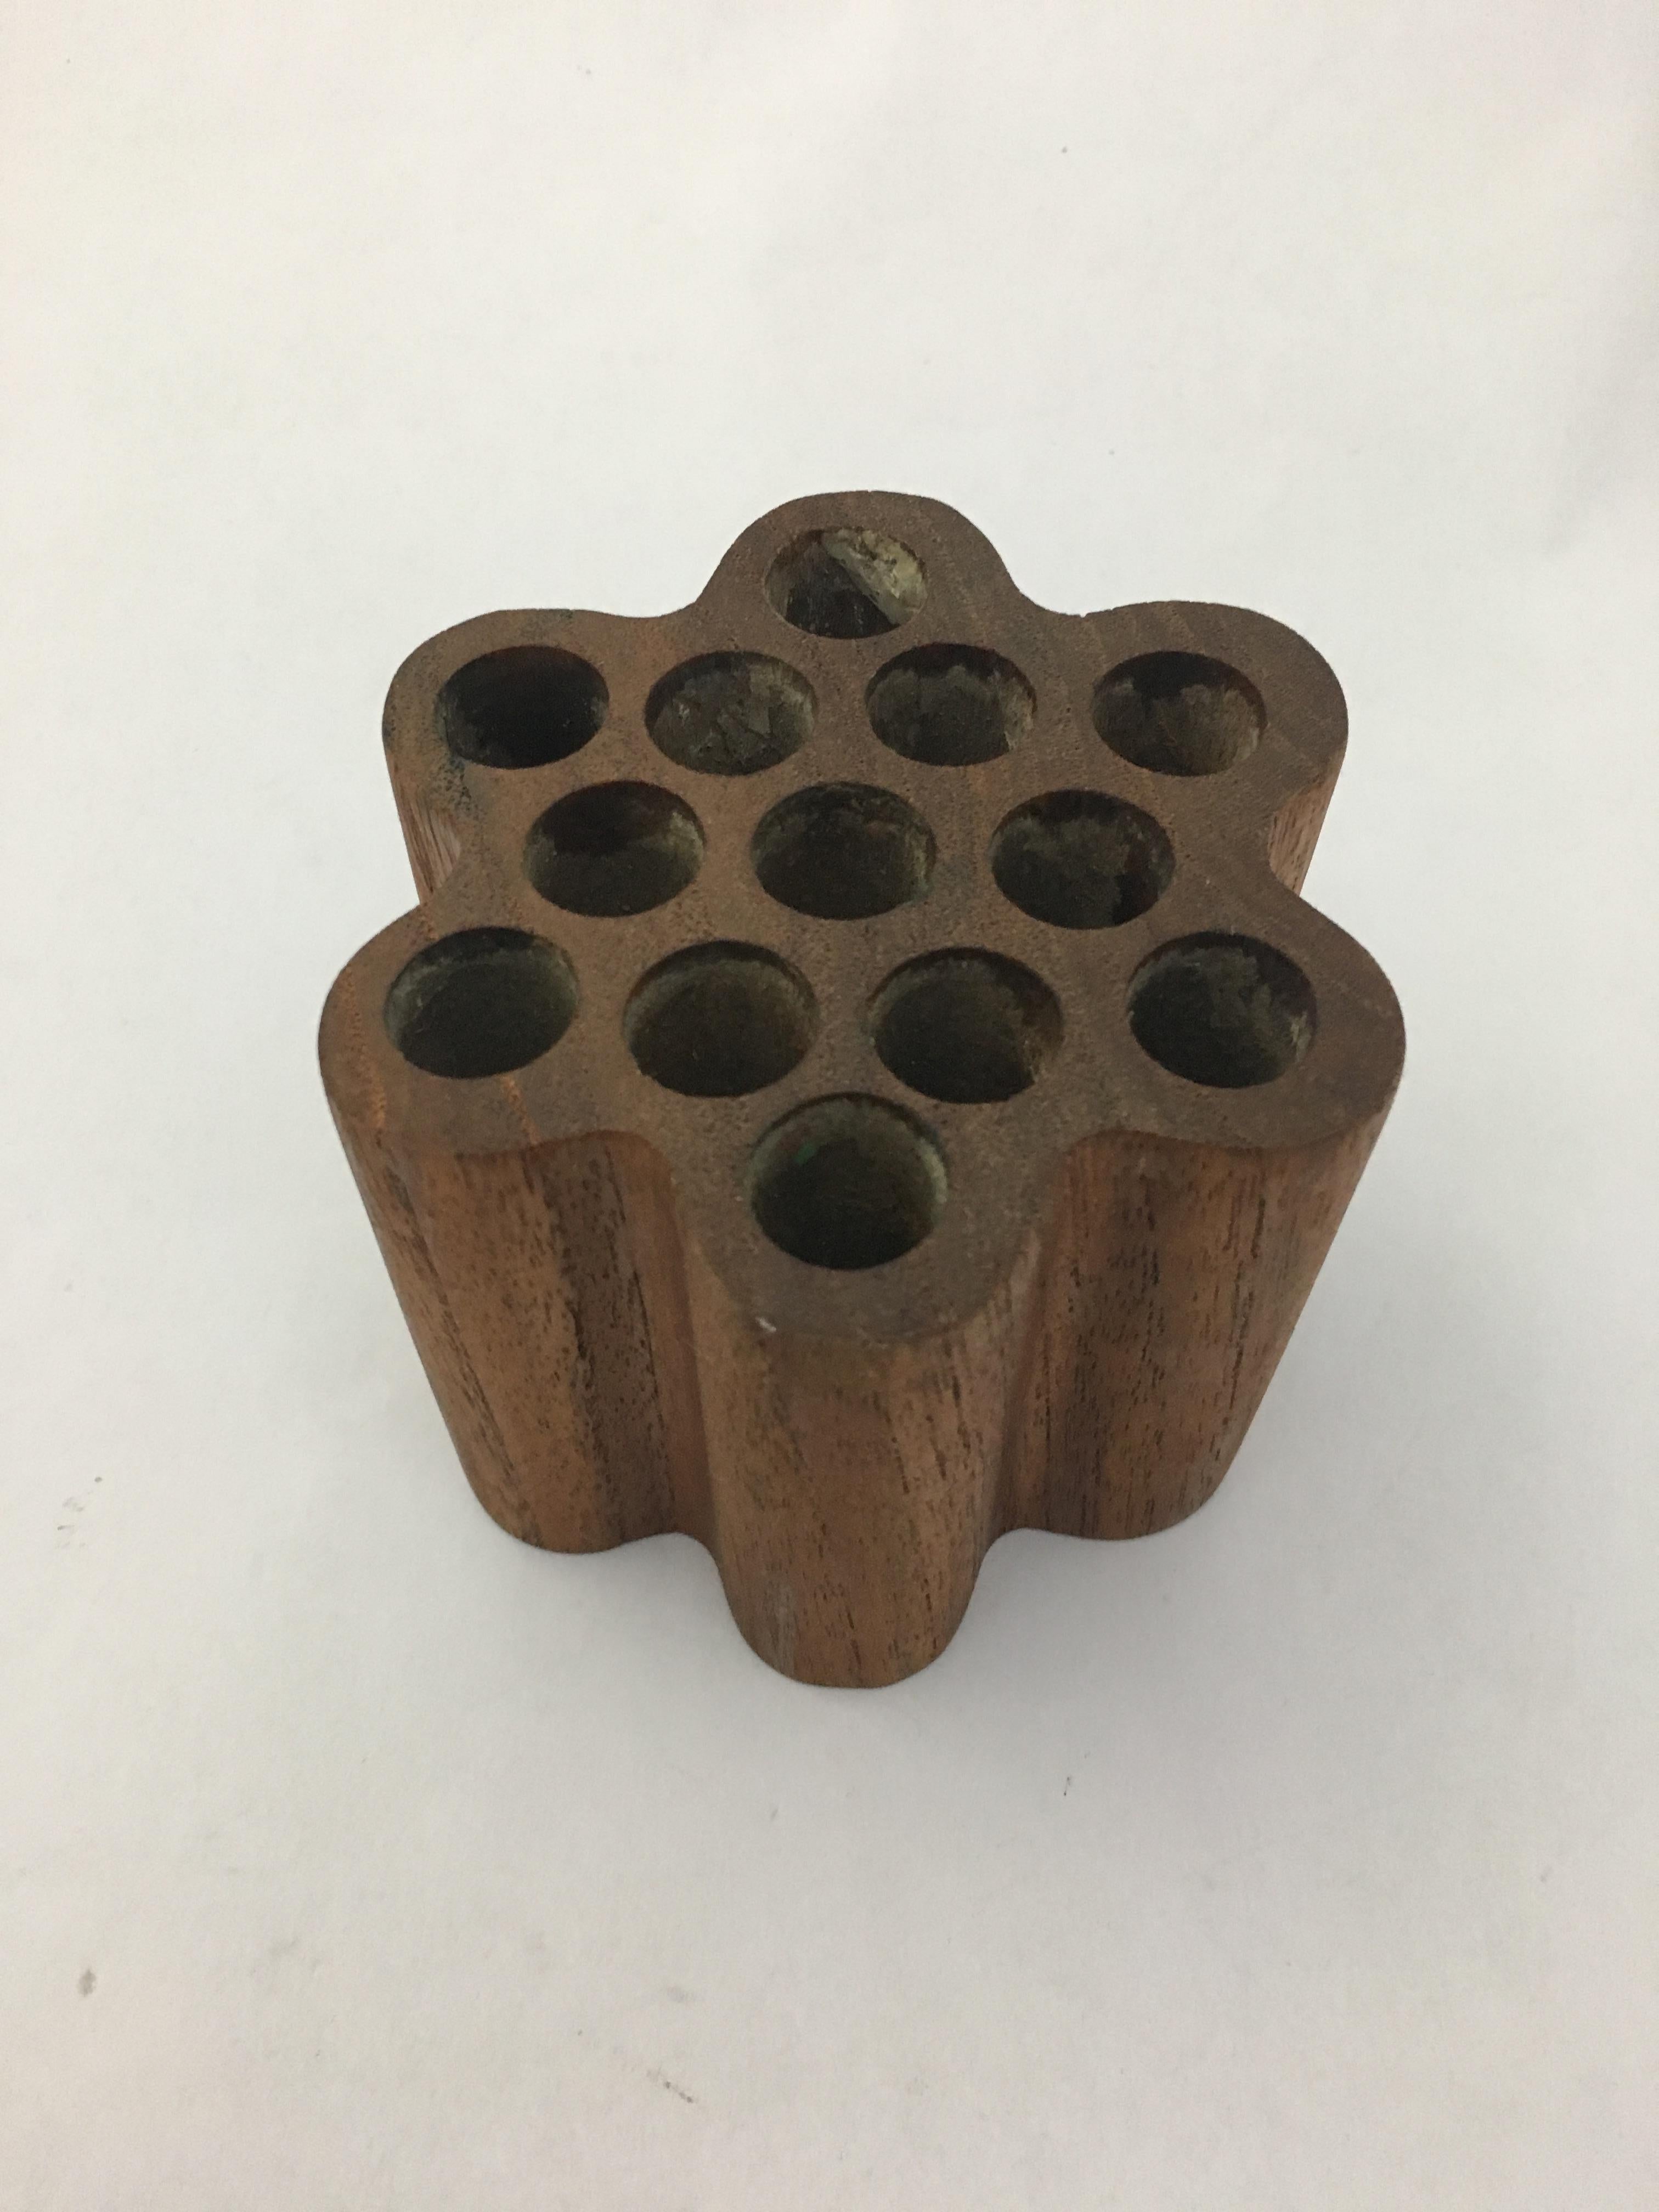 Retailed at Bonniers, New York City, circa 1960. Swedish teak pen or pencil holder that can hold up to 13 writing implements. Signed on bottom, Made in Sweden for Bonniers.